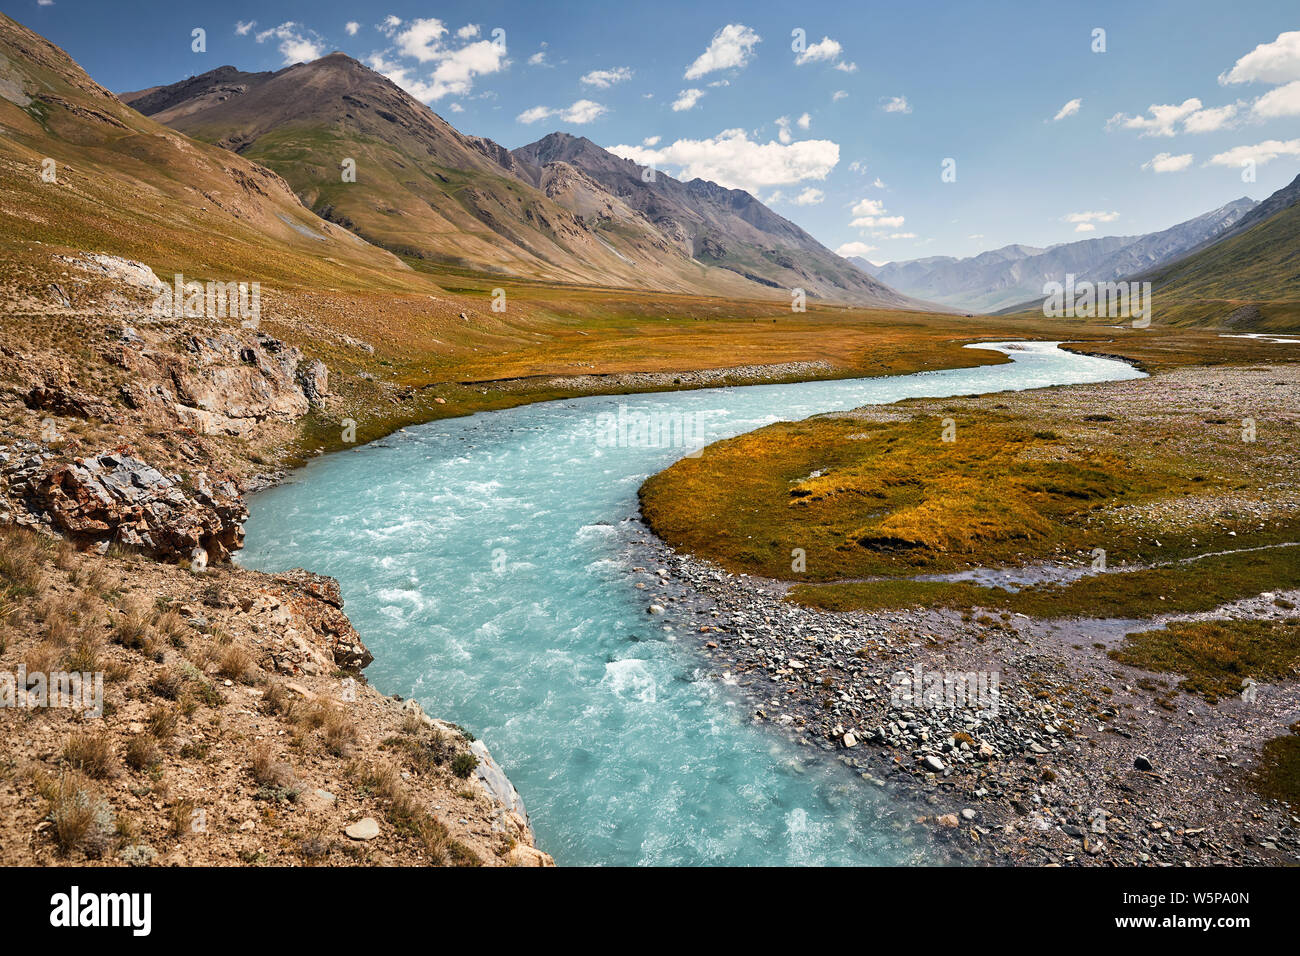 Beautiful river in the mountain valley against blue sky in Kyrgyzstan Stock Photo